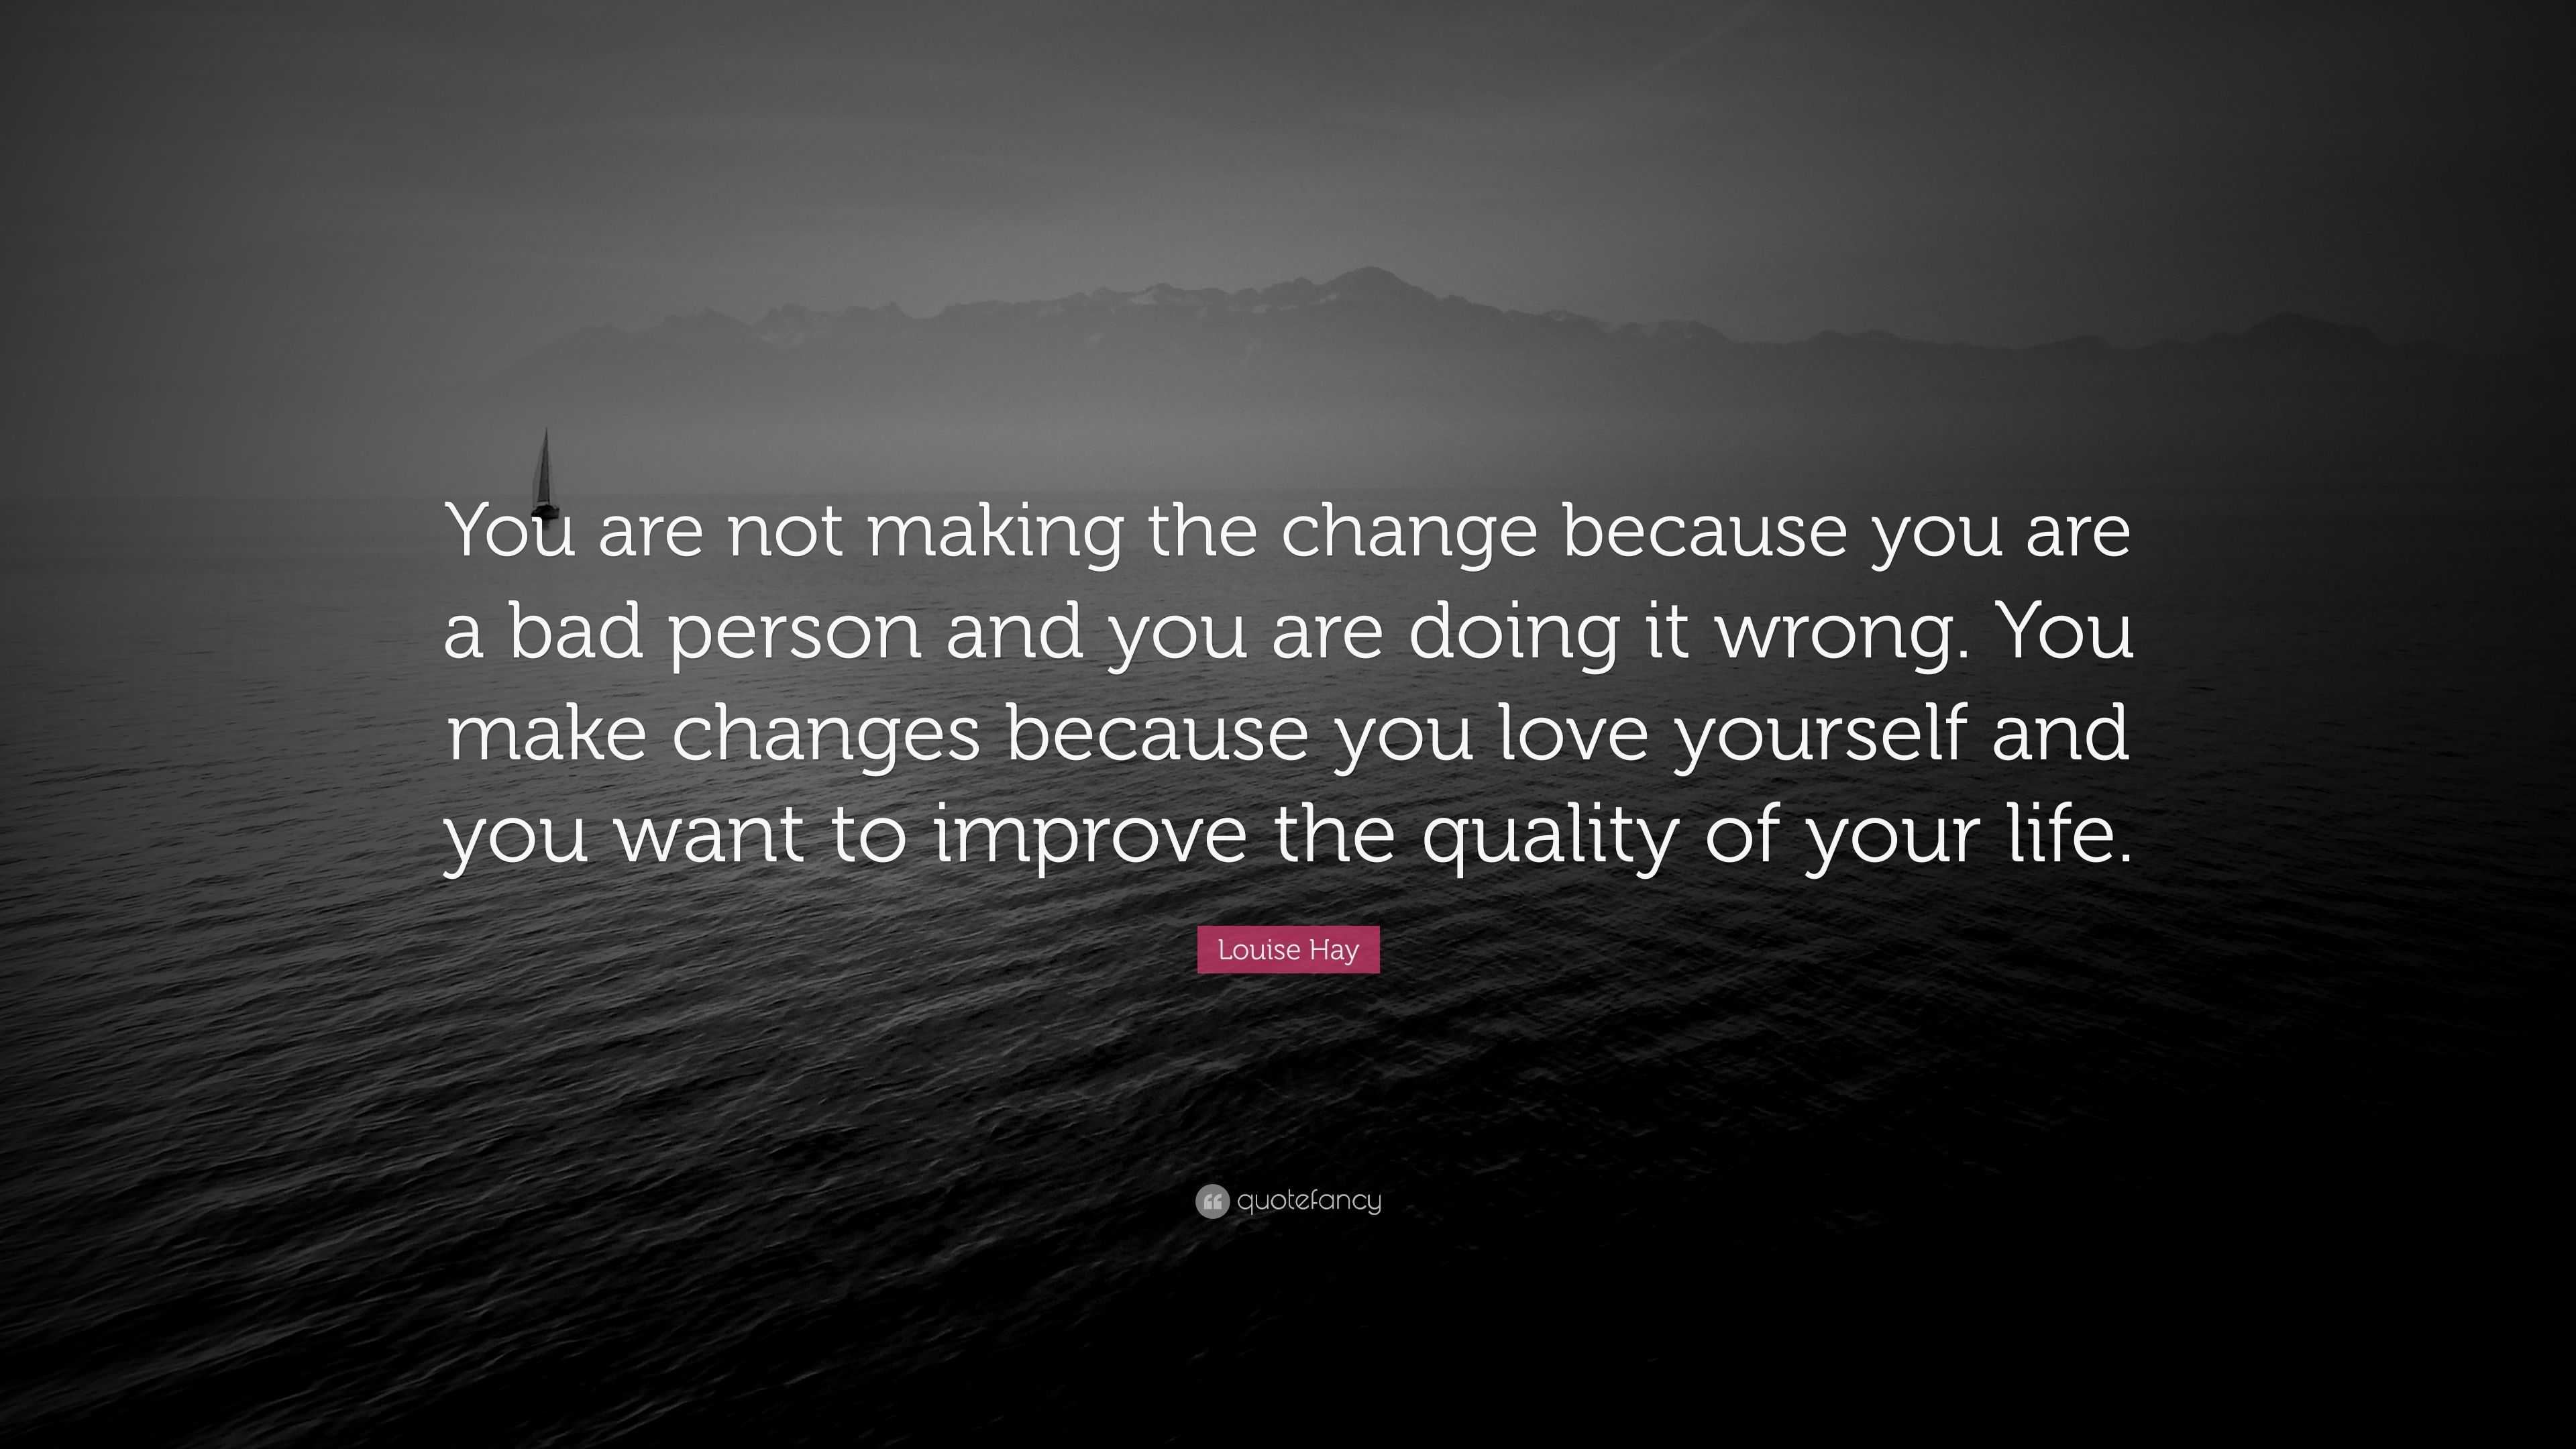 Louise Hay Quote: “You are not making the change because you are a bad ...